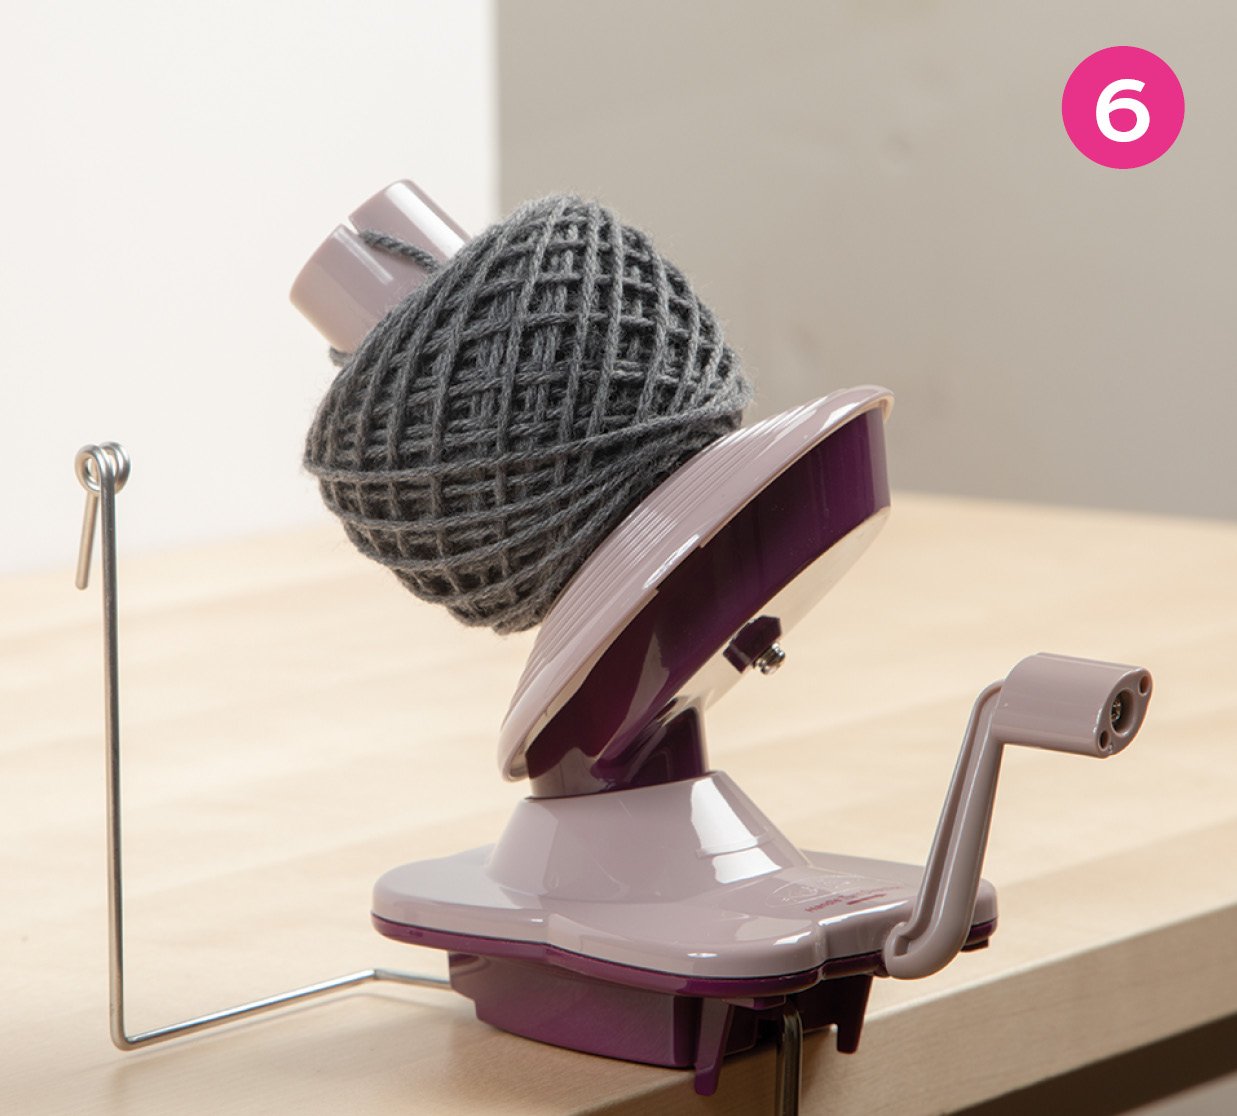 TWO SMART GADGETS FOR KNIT + CROCHET  How to wind a skein into a cake with yarn  winder + swift EASY 